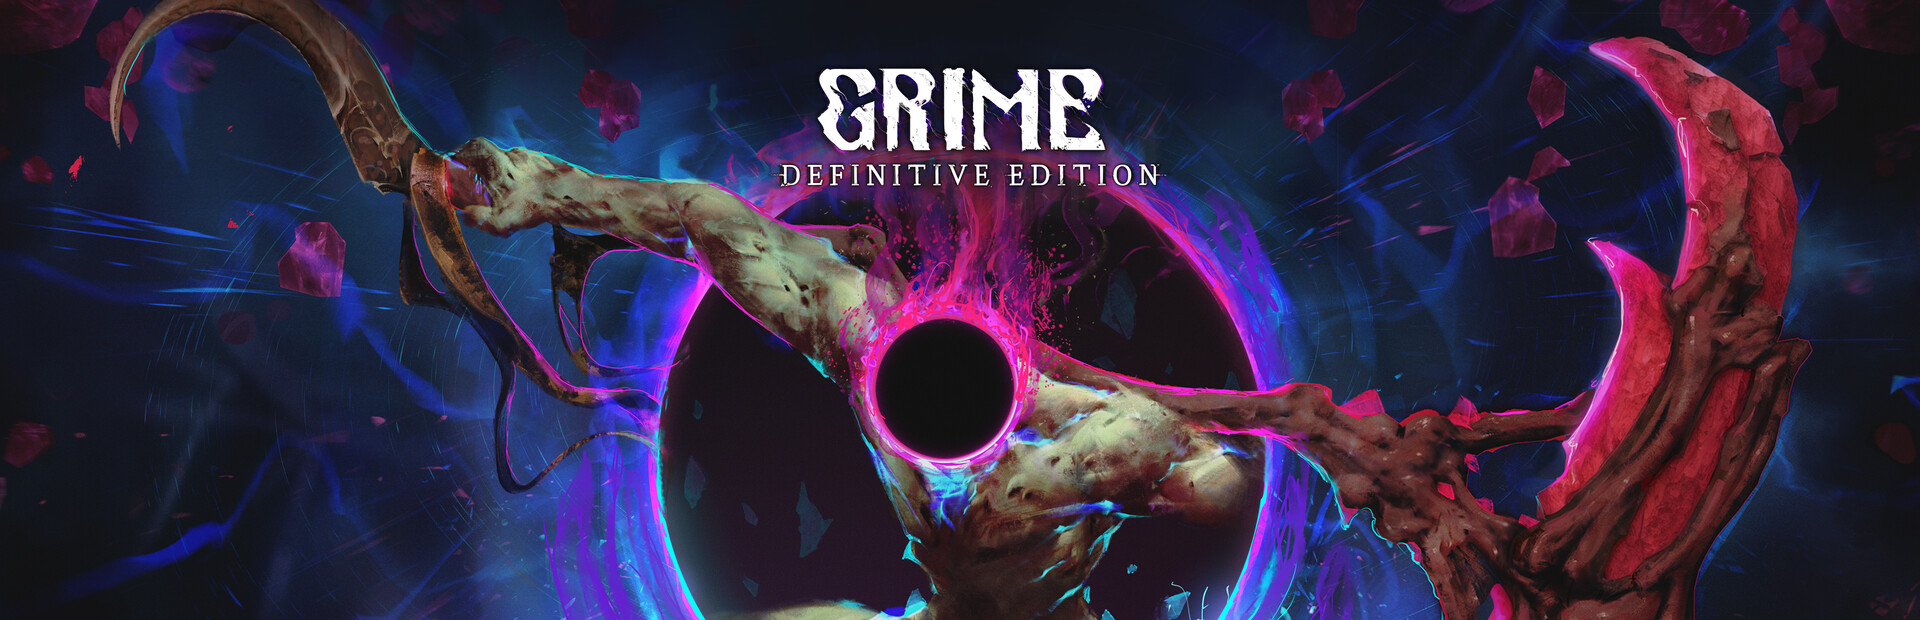 GRIME cover image